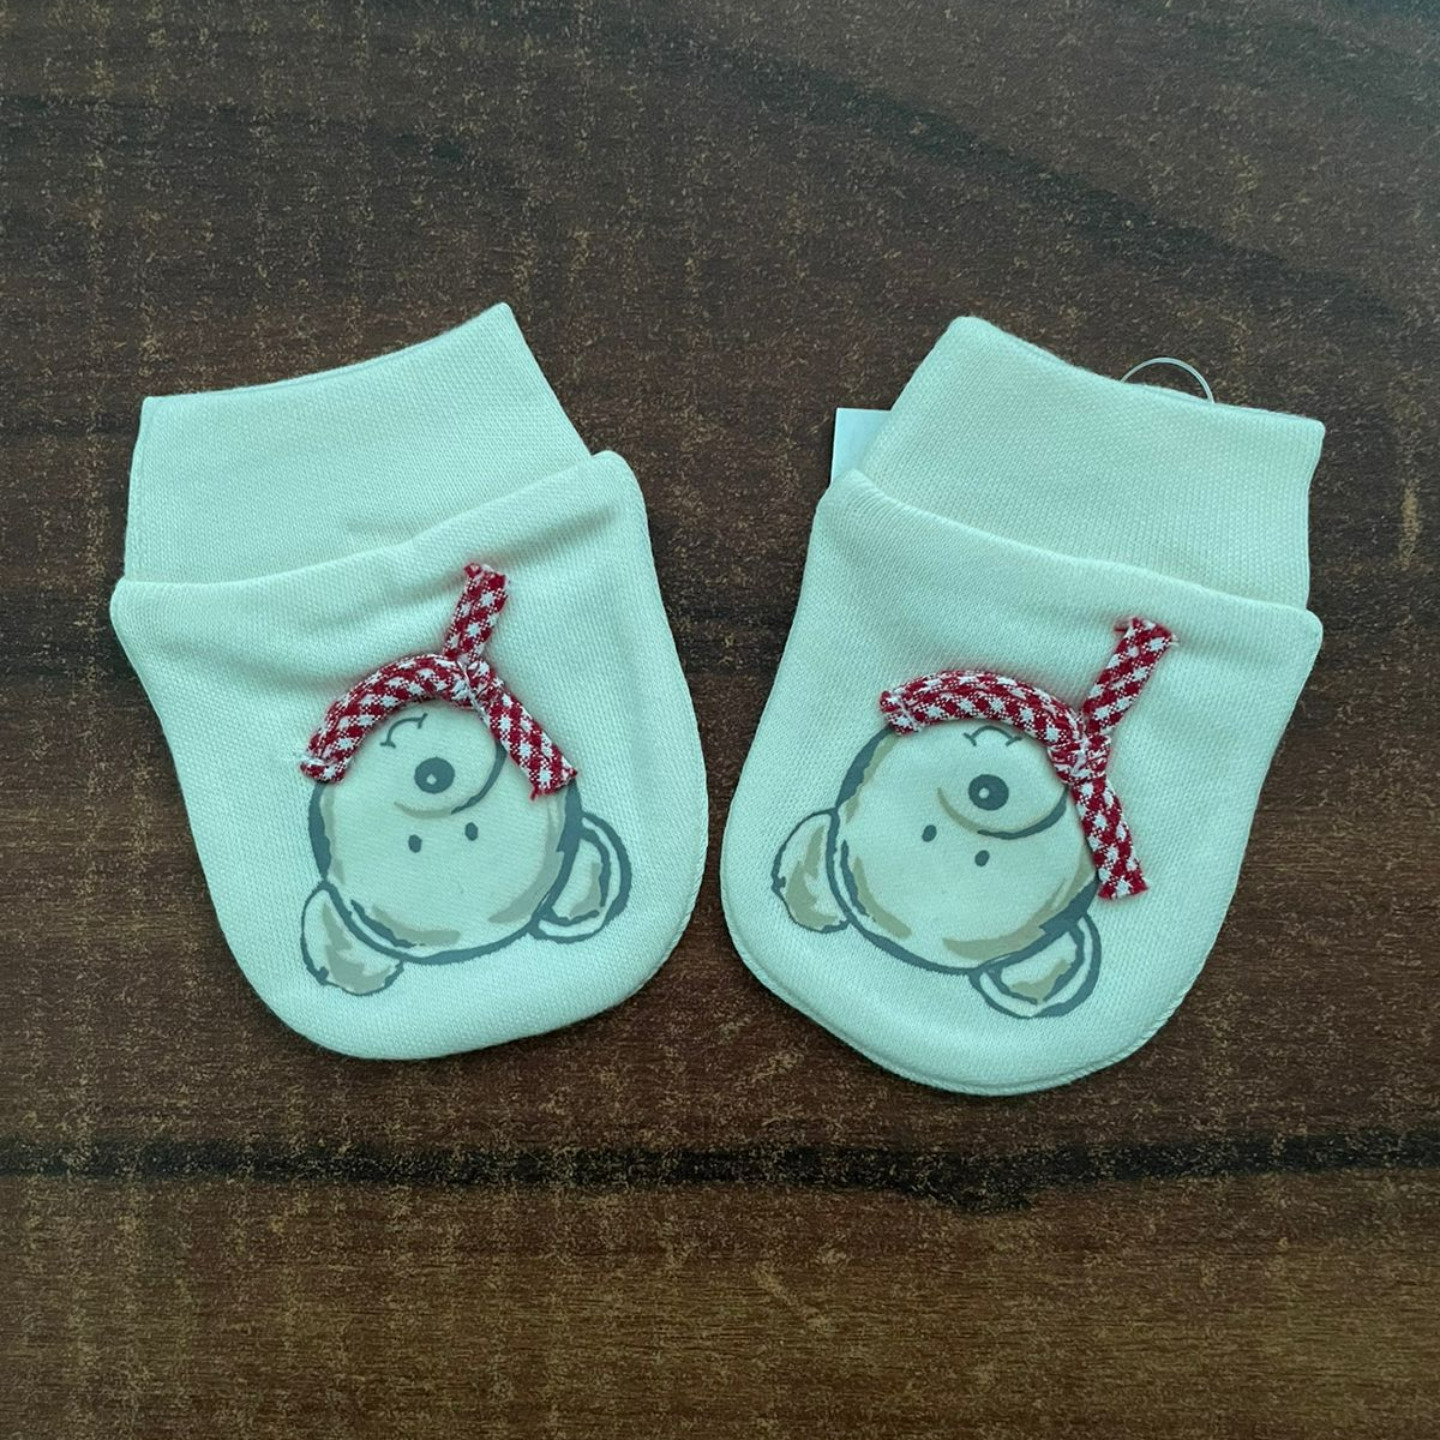 Cradle Togs Mittens Rs 80 Only NewBorn babies